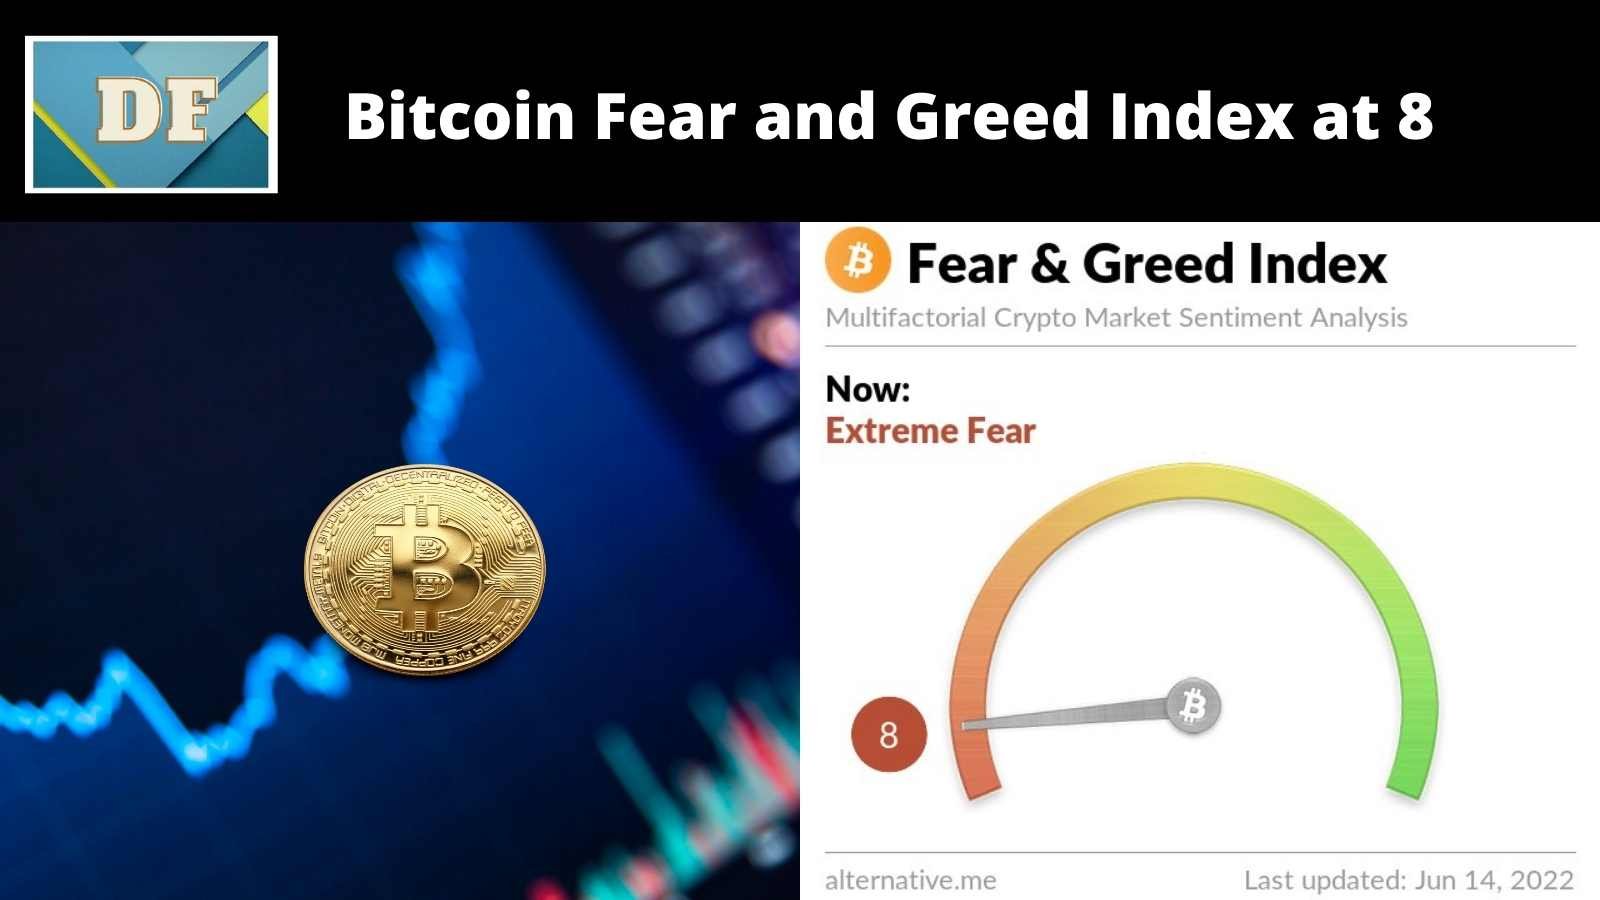 Bitcoin Fear and Greed Index at 8